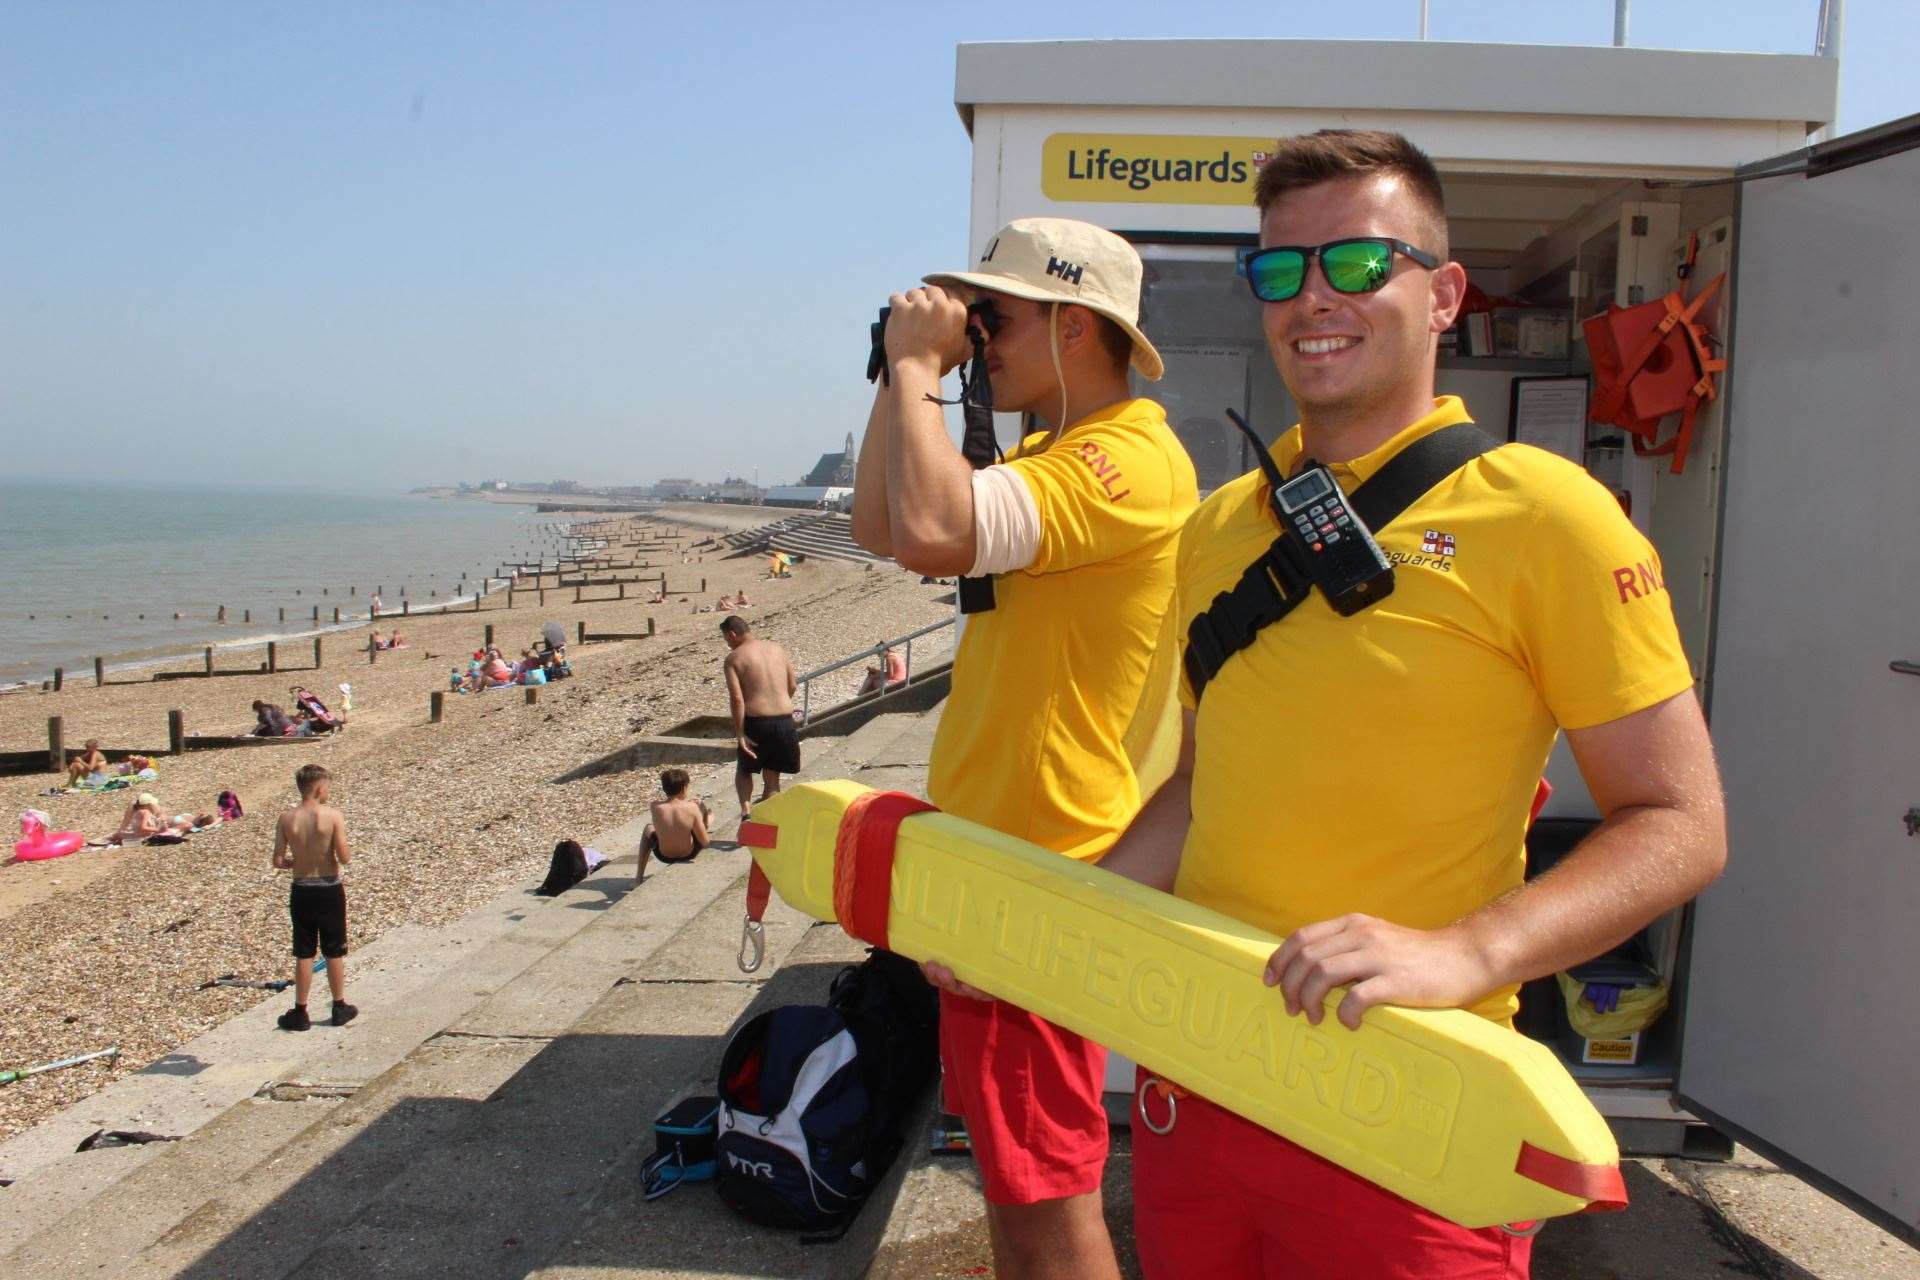 On duty: RNLI lifeguards Tom King, left, and Alex Wilmshurst on Sheerness beach on the Isle of Sheppey. Picture: John Nurden (14293458)